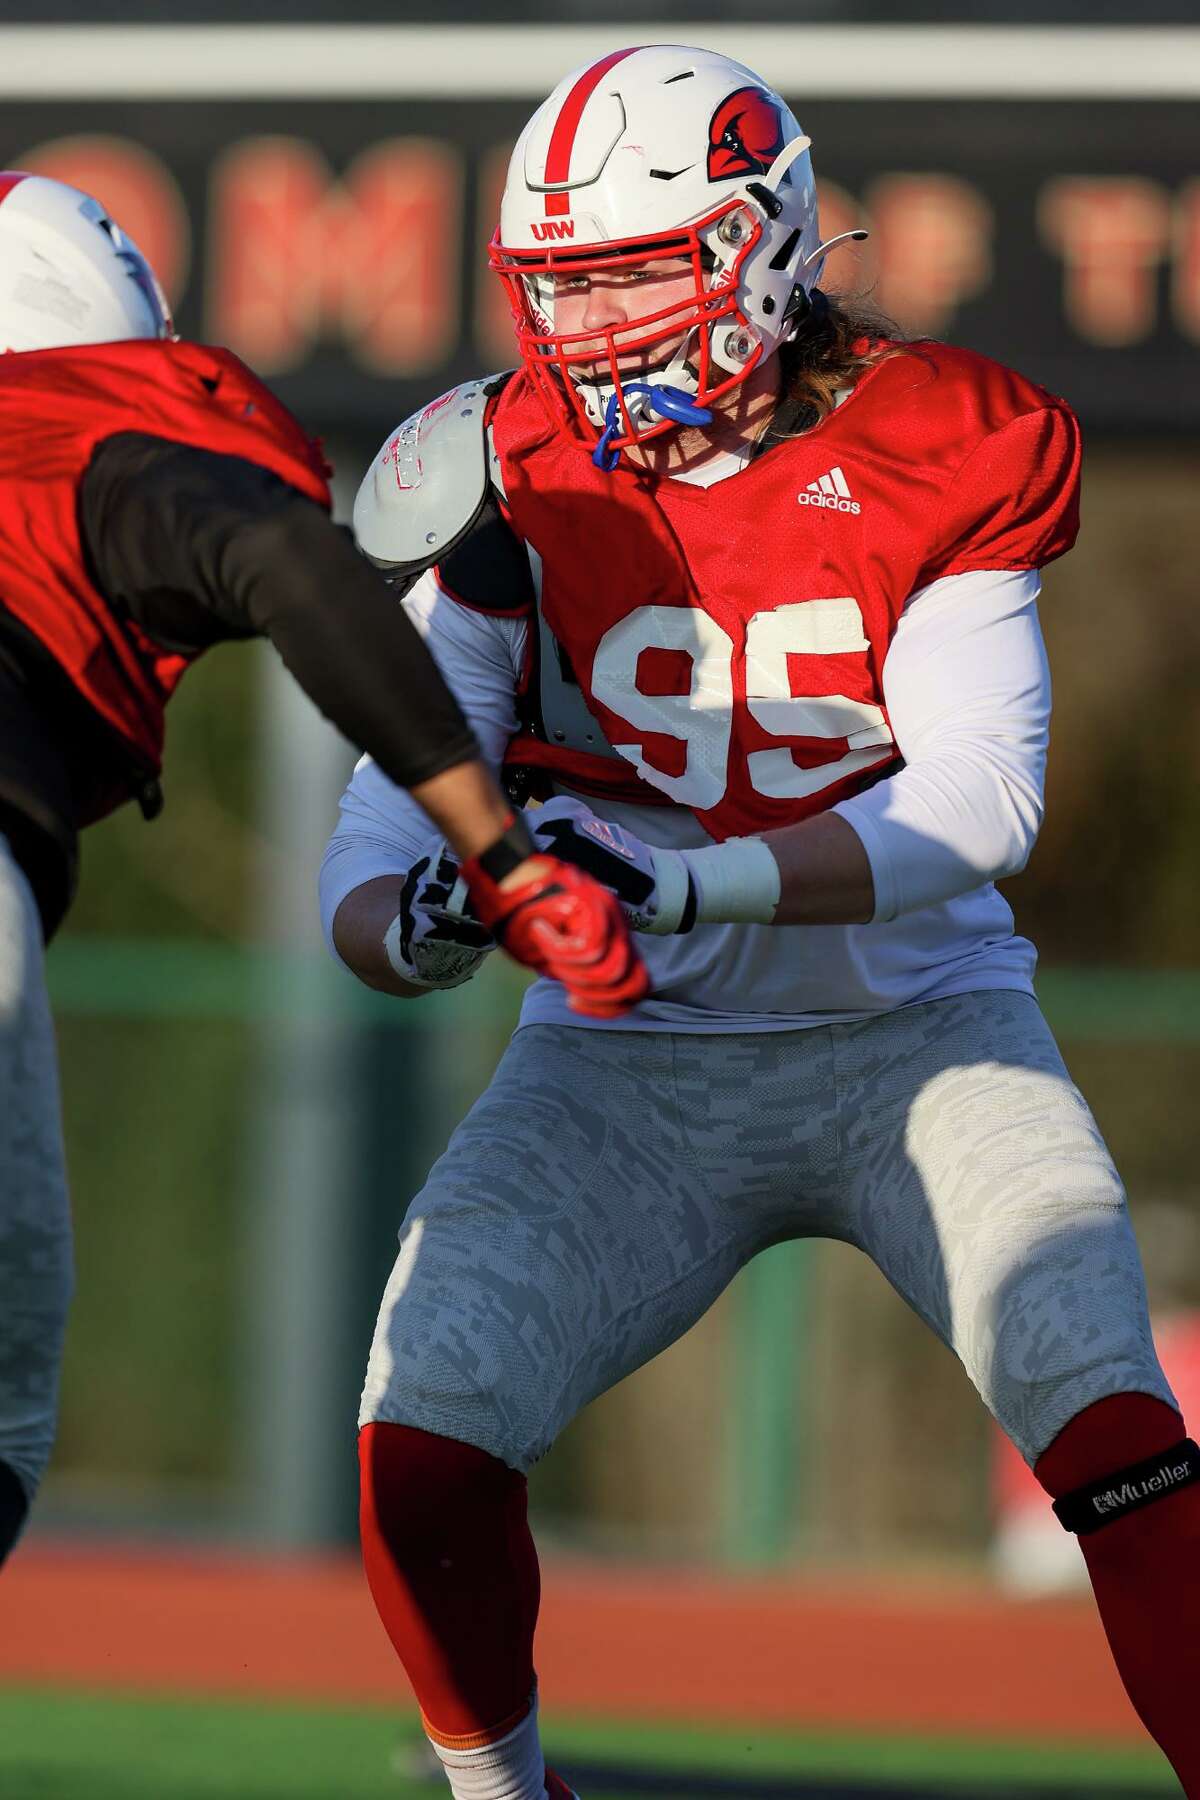 UIW defensive end Chance Main during a morning practice at Gayle and Tom Benson Stadium on Tuesday, Feb. 23, 2021. UIW plays its first game of the spring Southland Conference season Saturday at McNeese State.